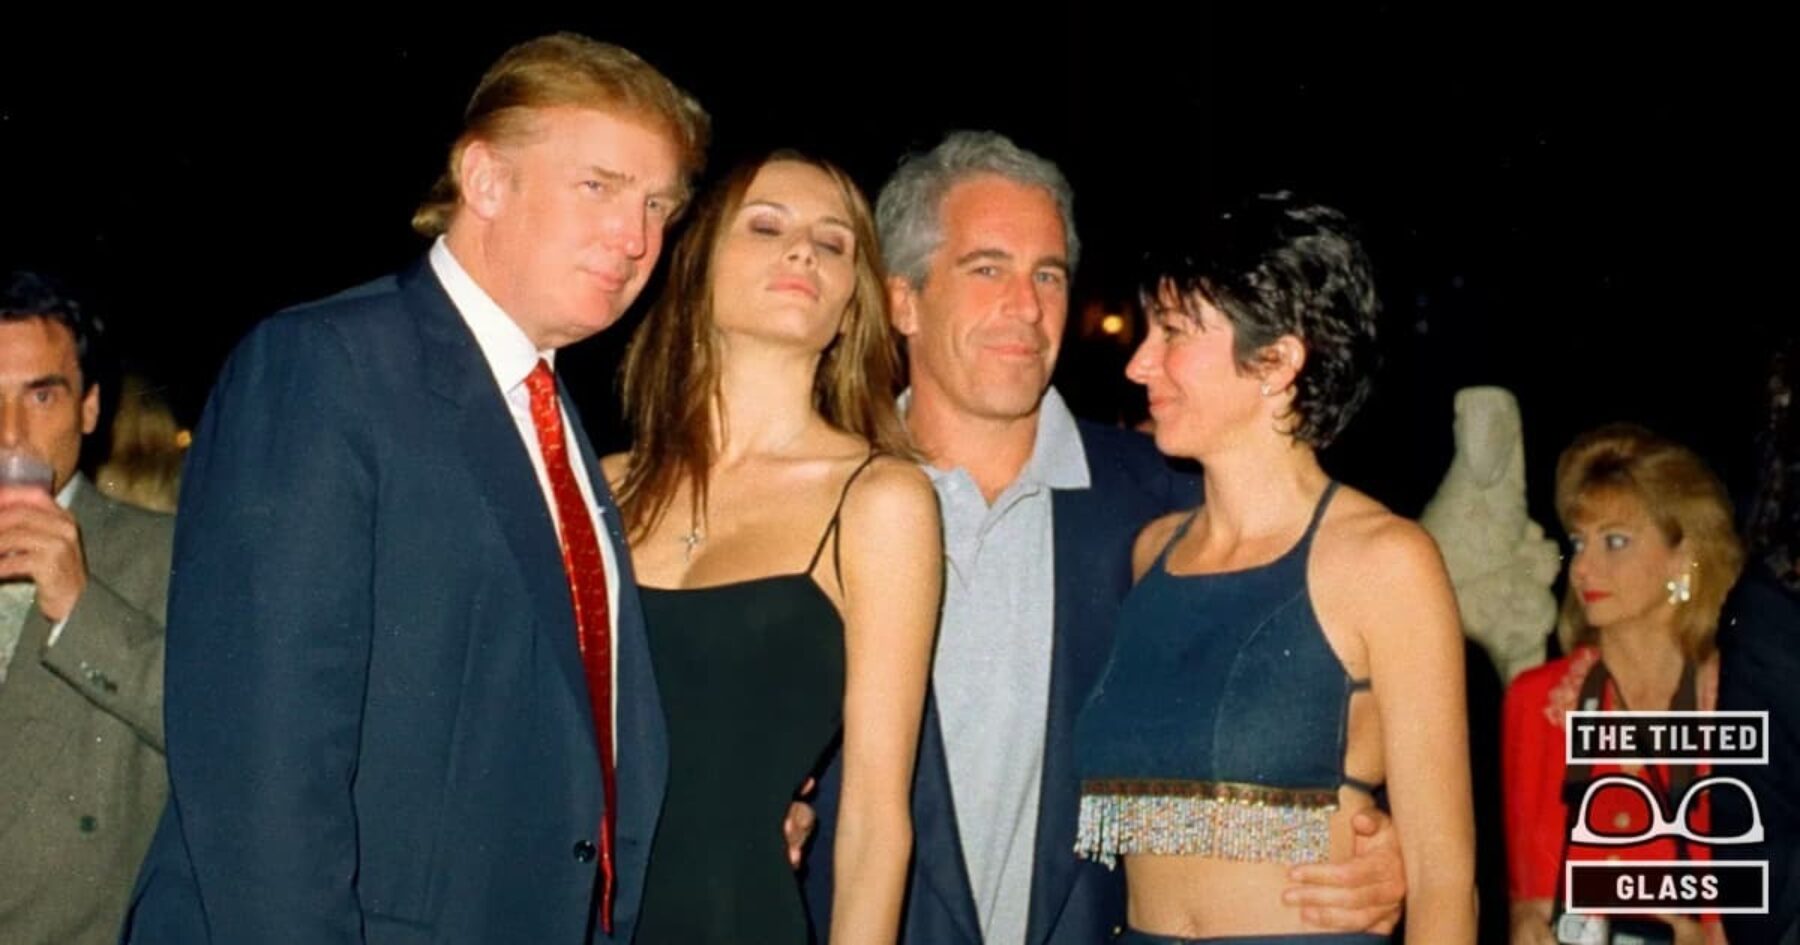 Clever Christians Use Bible to Defend Trump & Bash Clinton on Epstein Sex Scandal